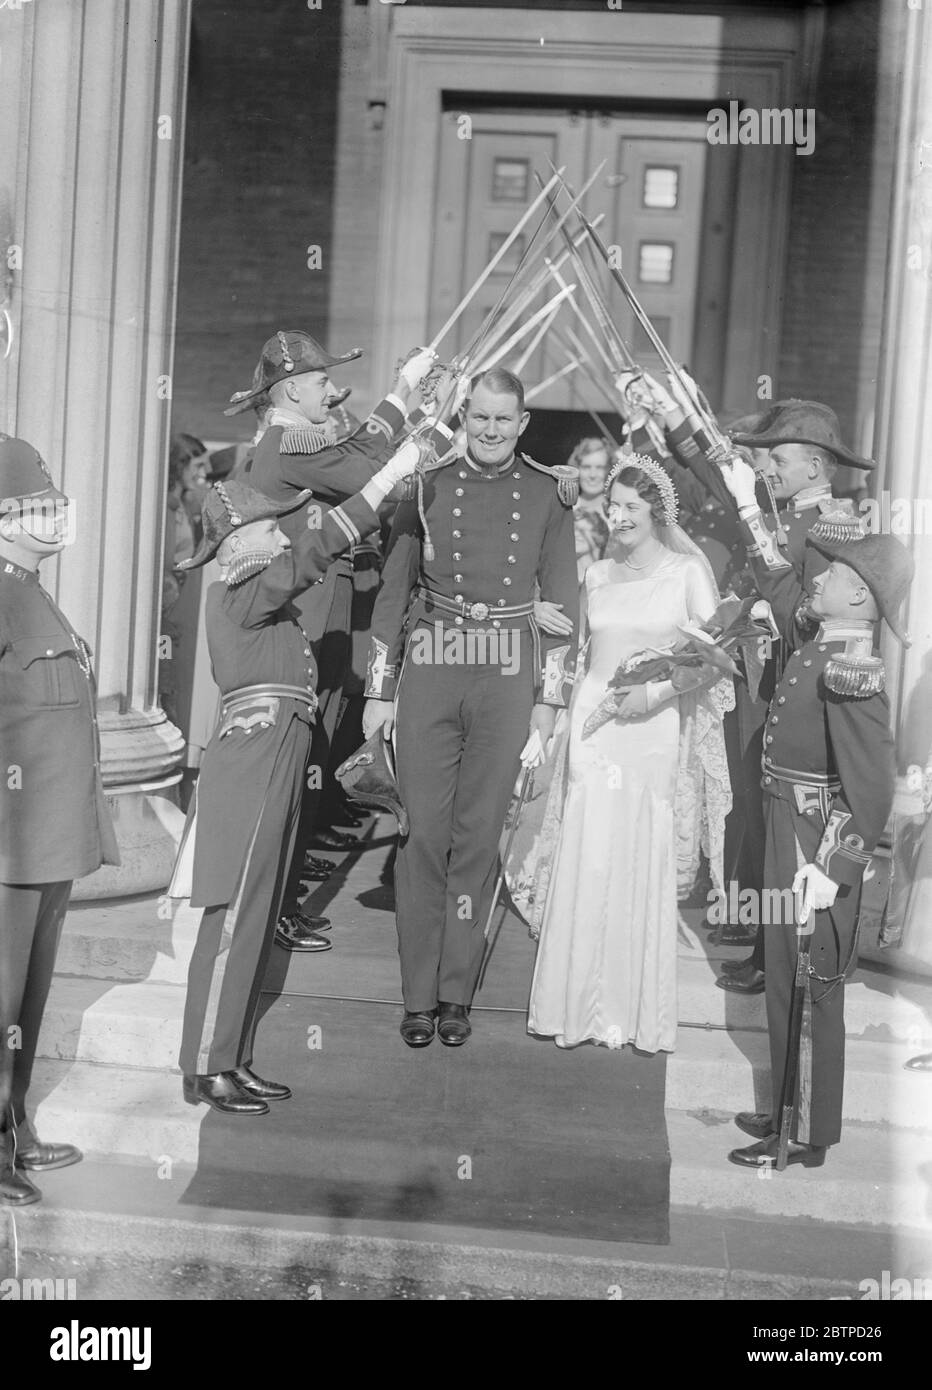 Naval officers wedding . The marriage took place at St Pater ' s , Eaton square , between Lieut E H Gelson Gregson , Royal Navy and Miss Mabel MacGregor . The bride and bridegroom leaving under an archway of swords . 3 October 1931 Stock Photo